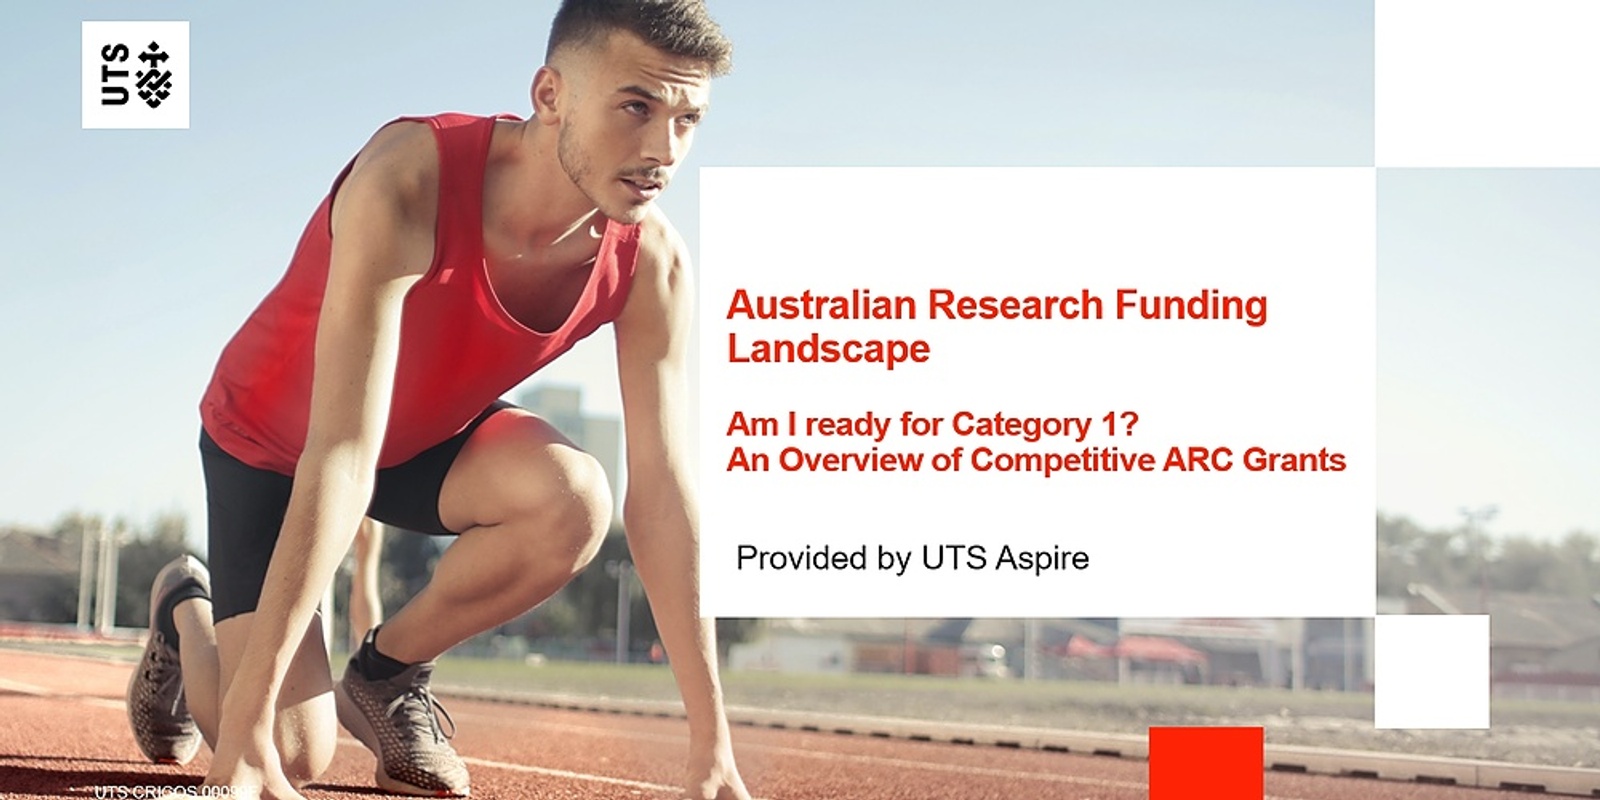 ARFL - Am I ready for Category 1? An Overview of Competitive ARC Grants 